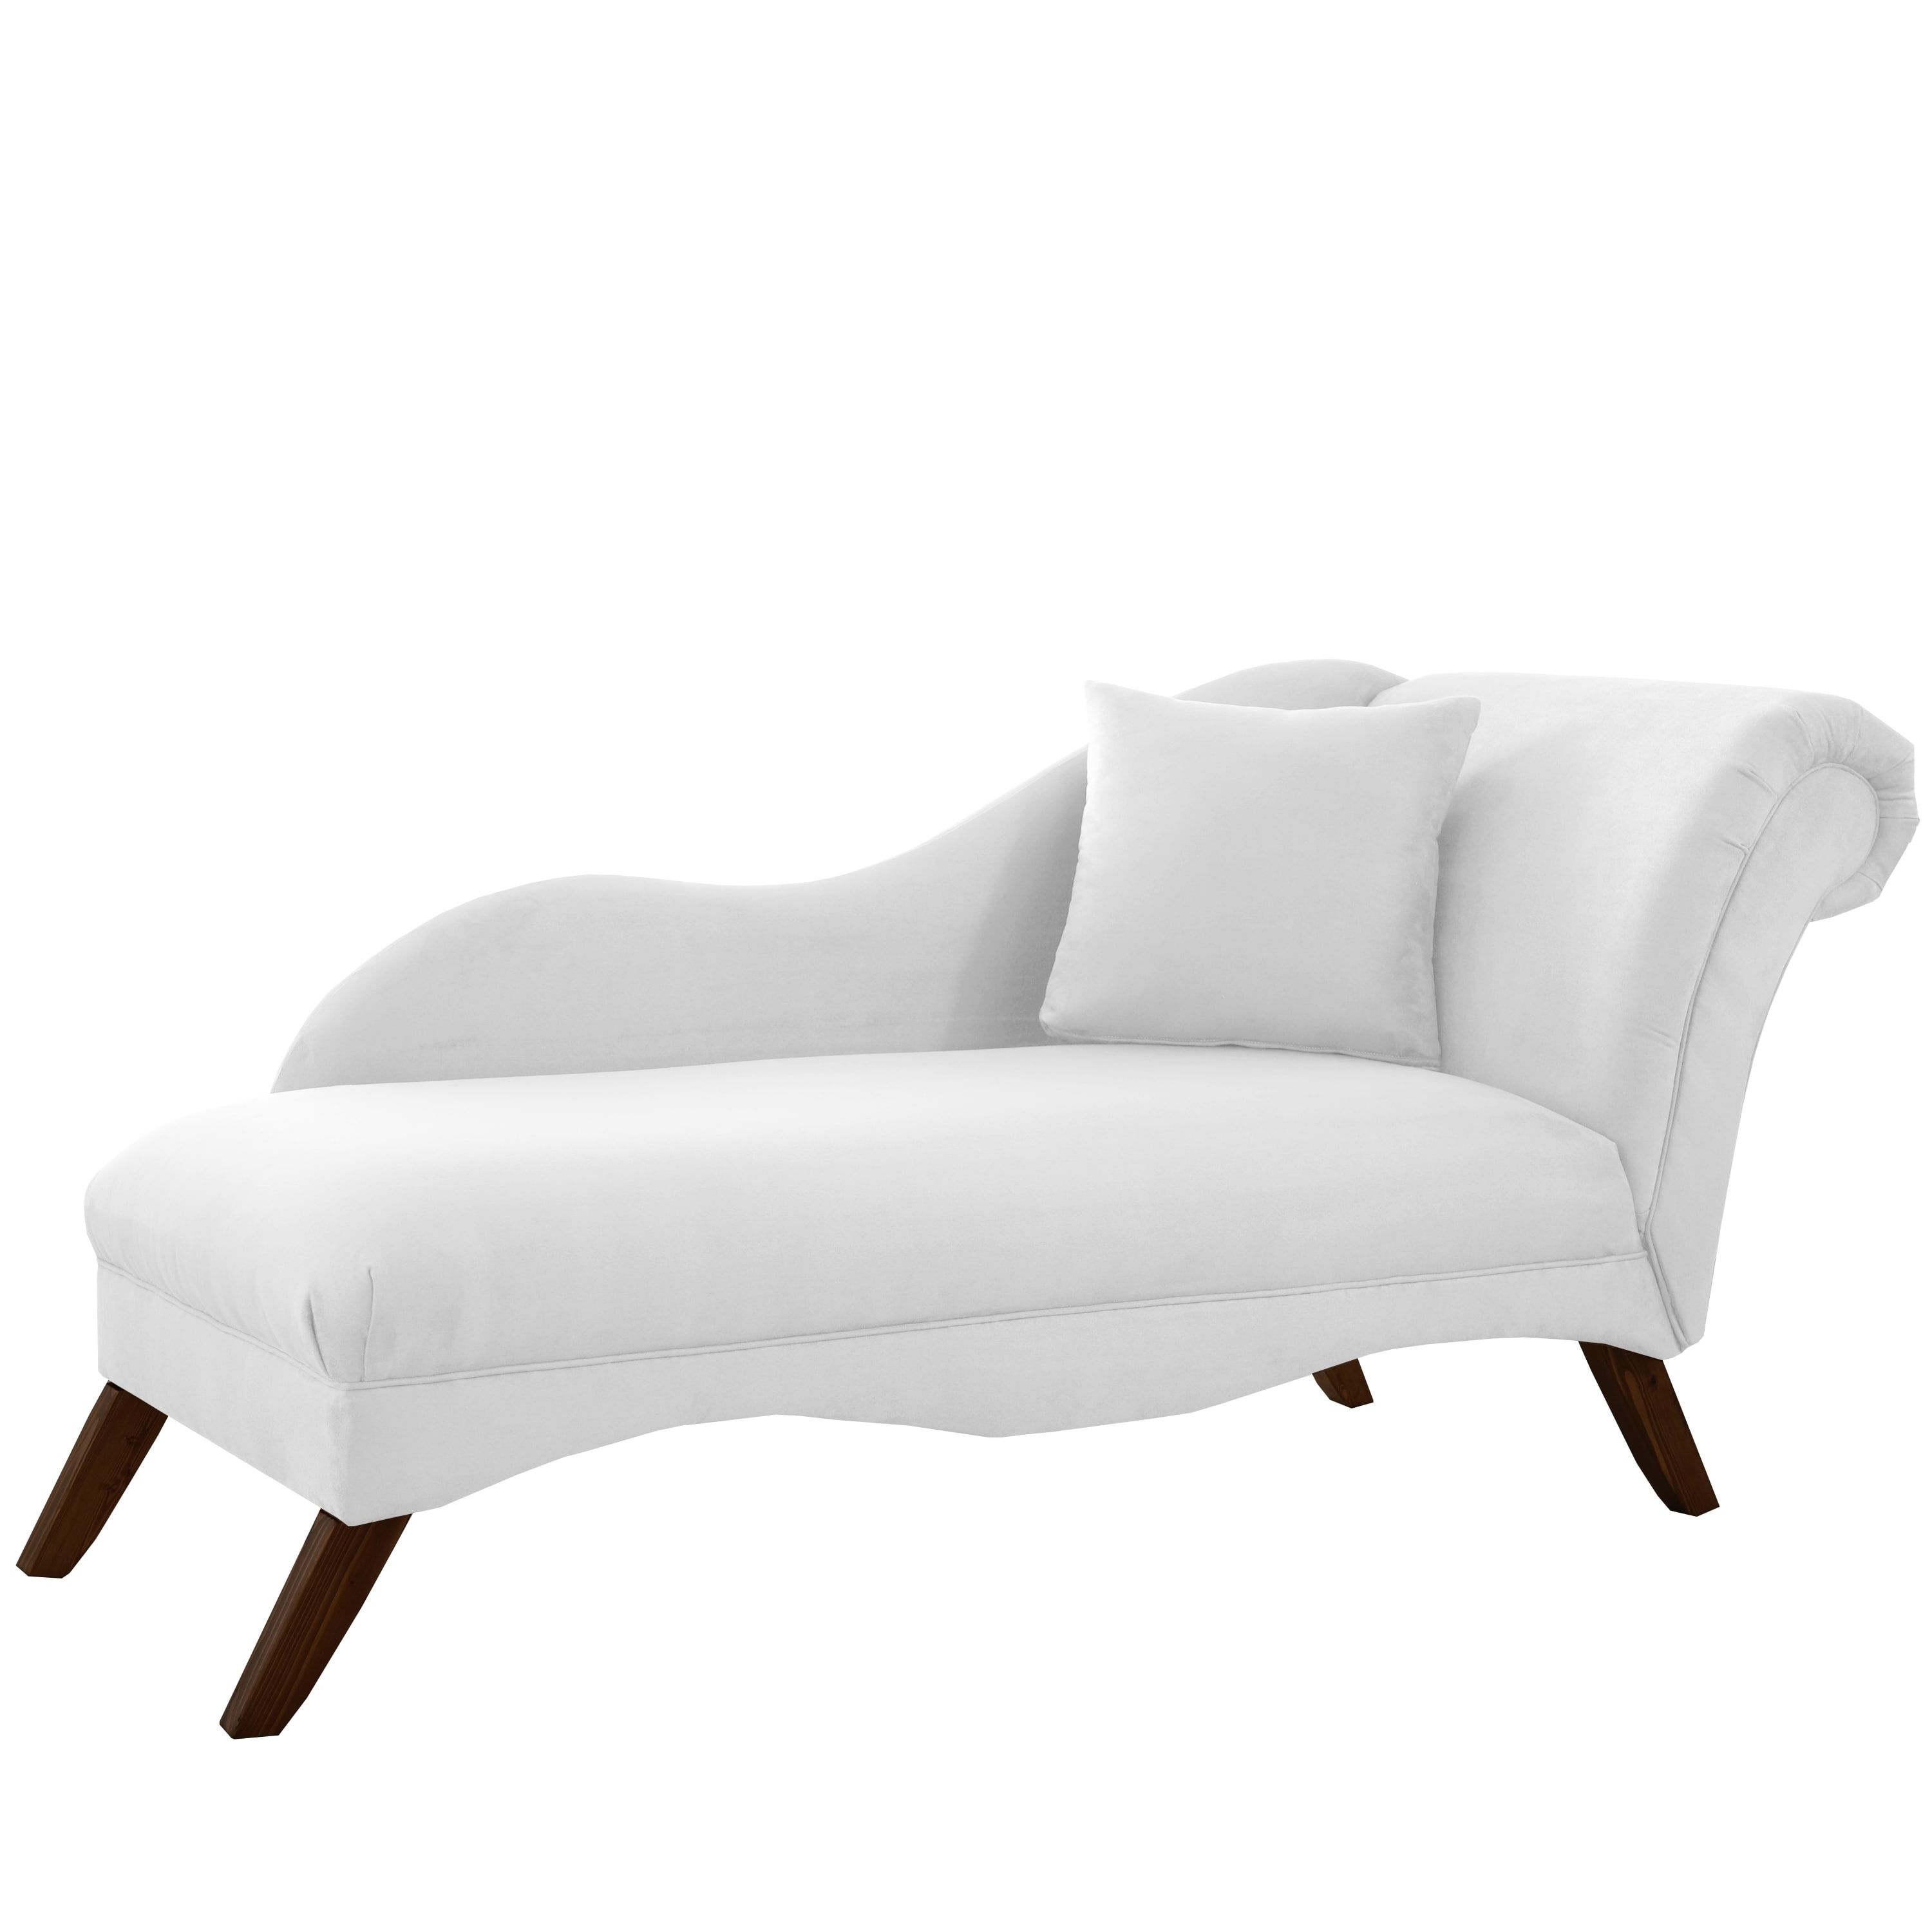 White Chaise Lounges For Latest Skyline Furniture Chaise Lounge In Velvet White – Free Shipping (View 3 of 15)